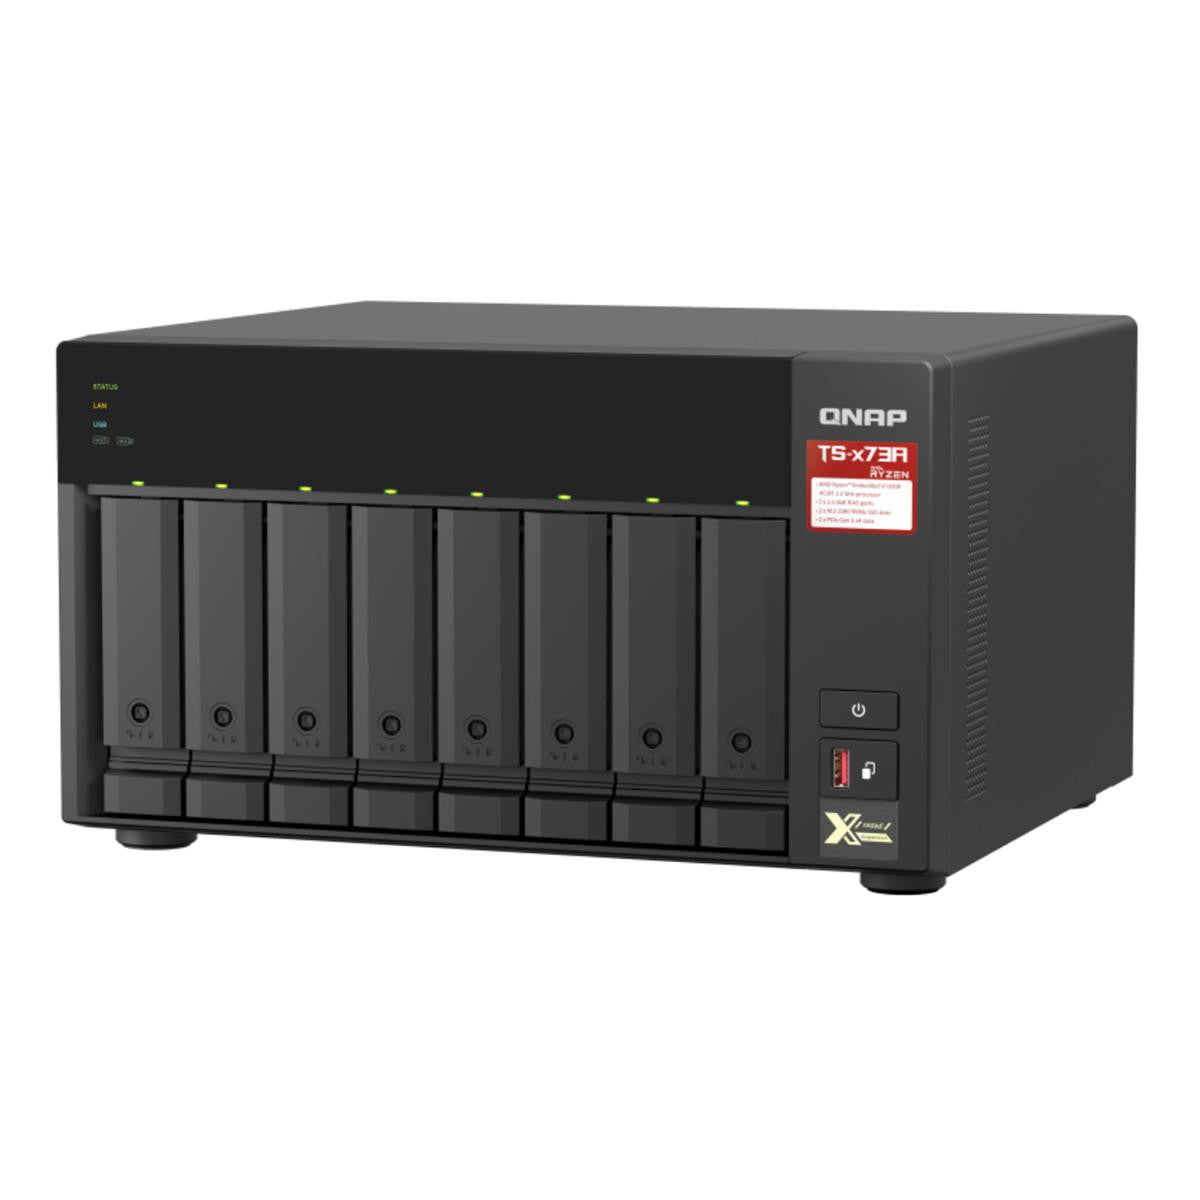 QNAP TS-873A 8-BAY NAS with 16GB DDR4 RAM and 16TB (8x2TB) Western Digital RED PLUS Drives Fully Assembled and Tested